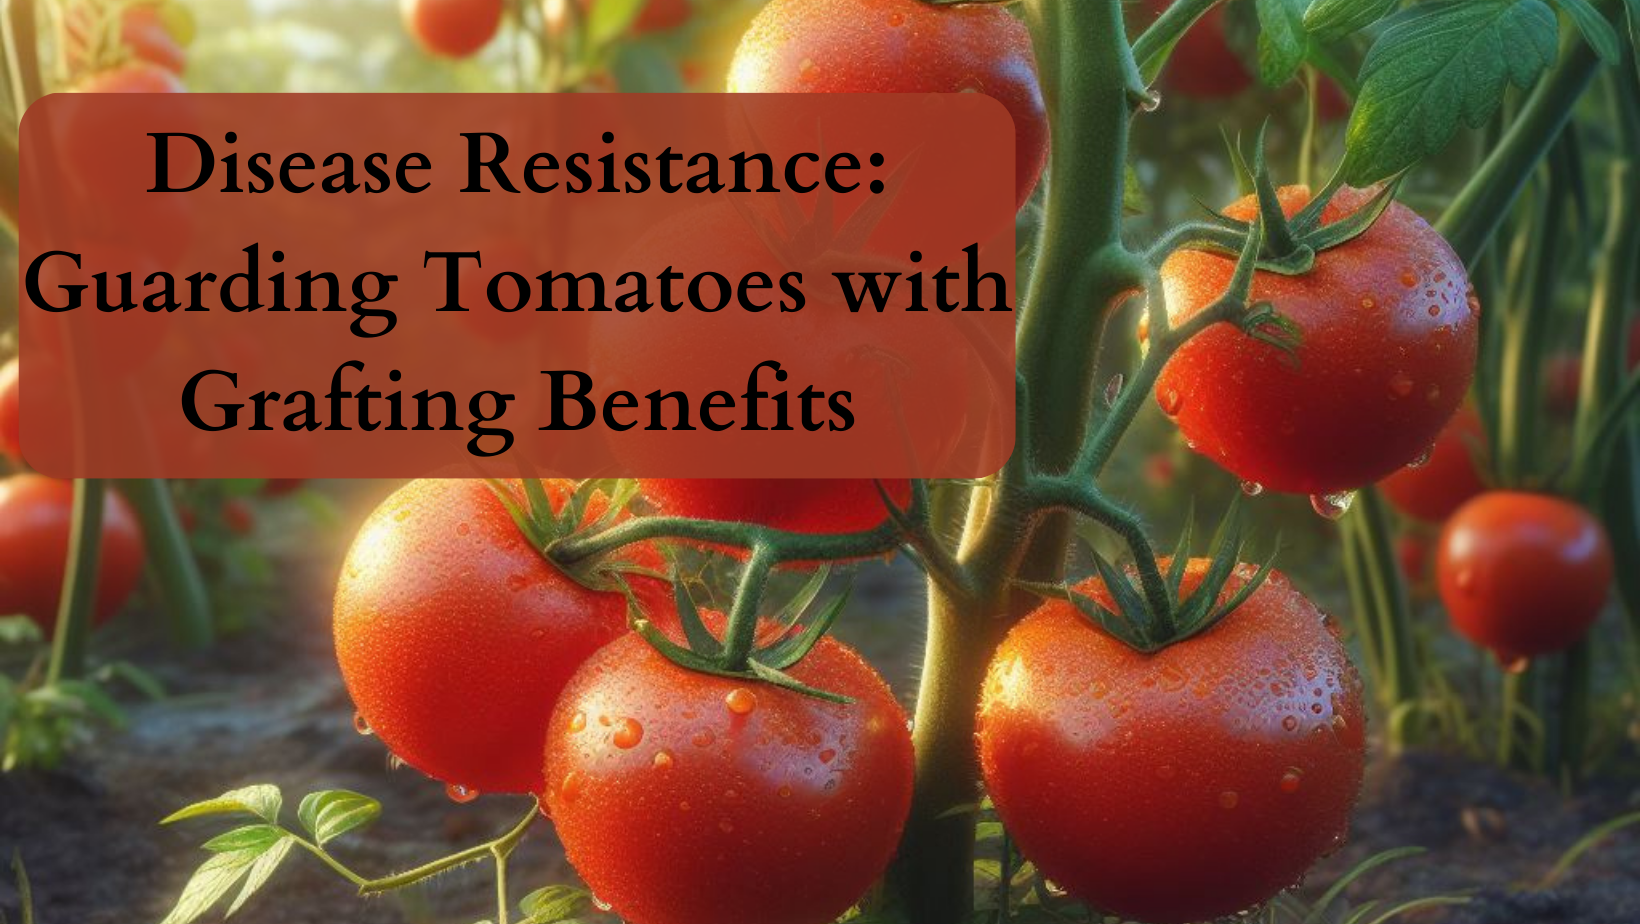 Disease Resistance: Guarding Tomatoes with Grafting Benefits